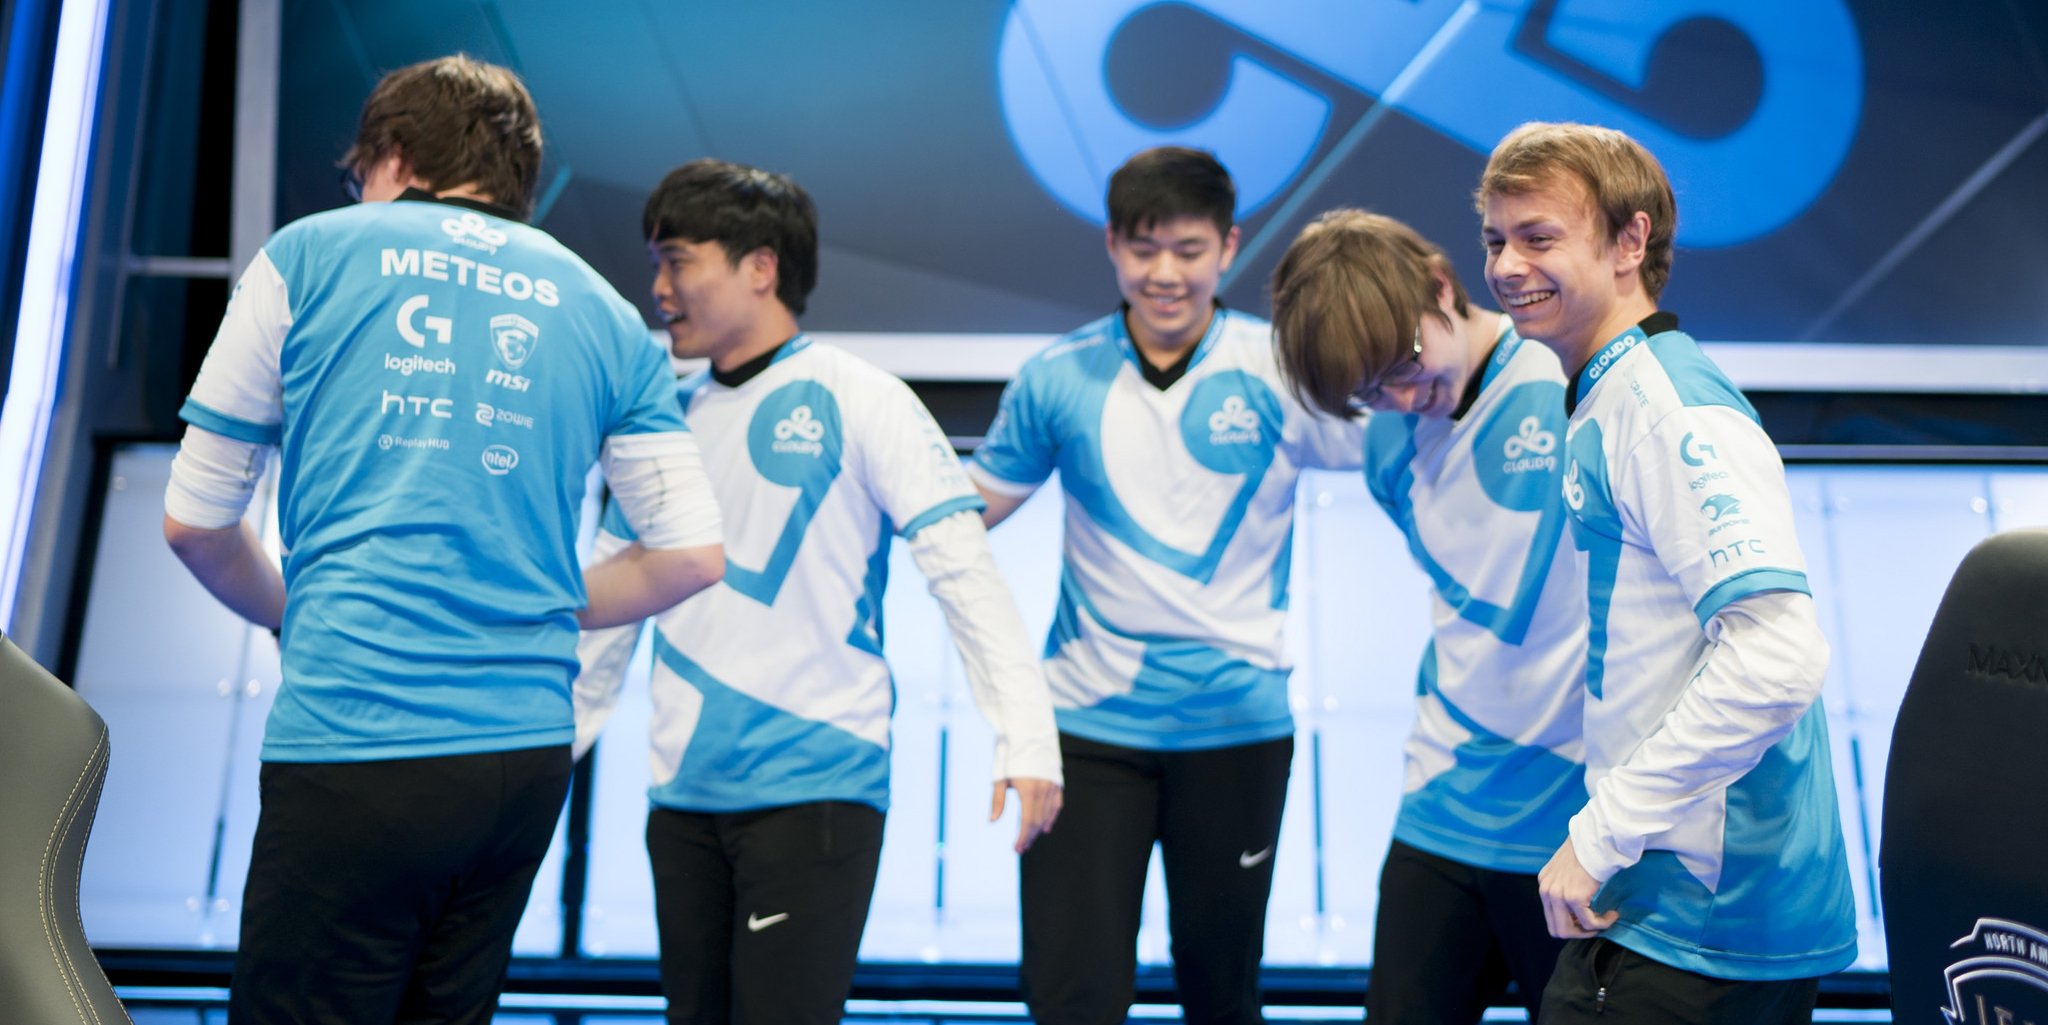 Cloud9 secure spot at Worlds with win over Immortals - Dot Esports